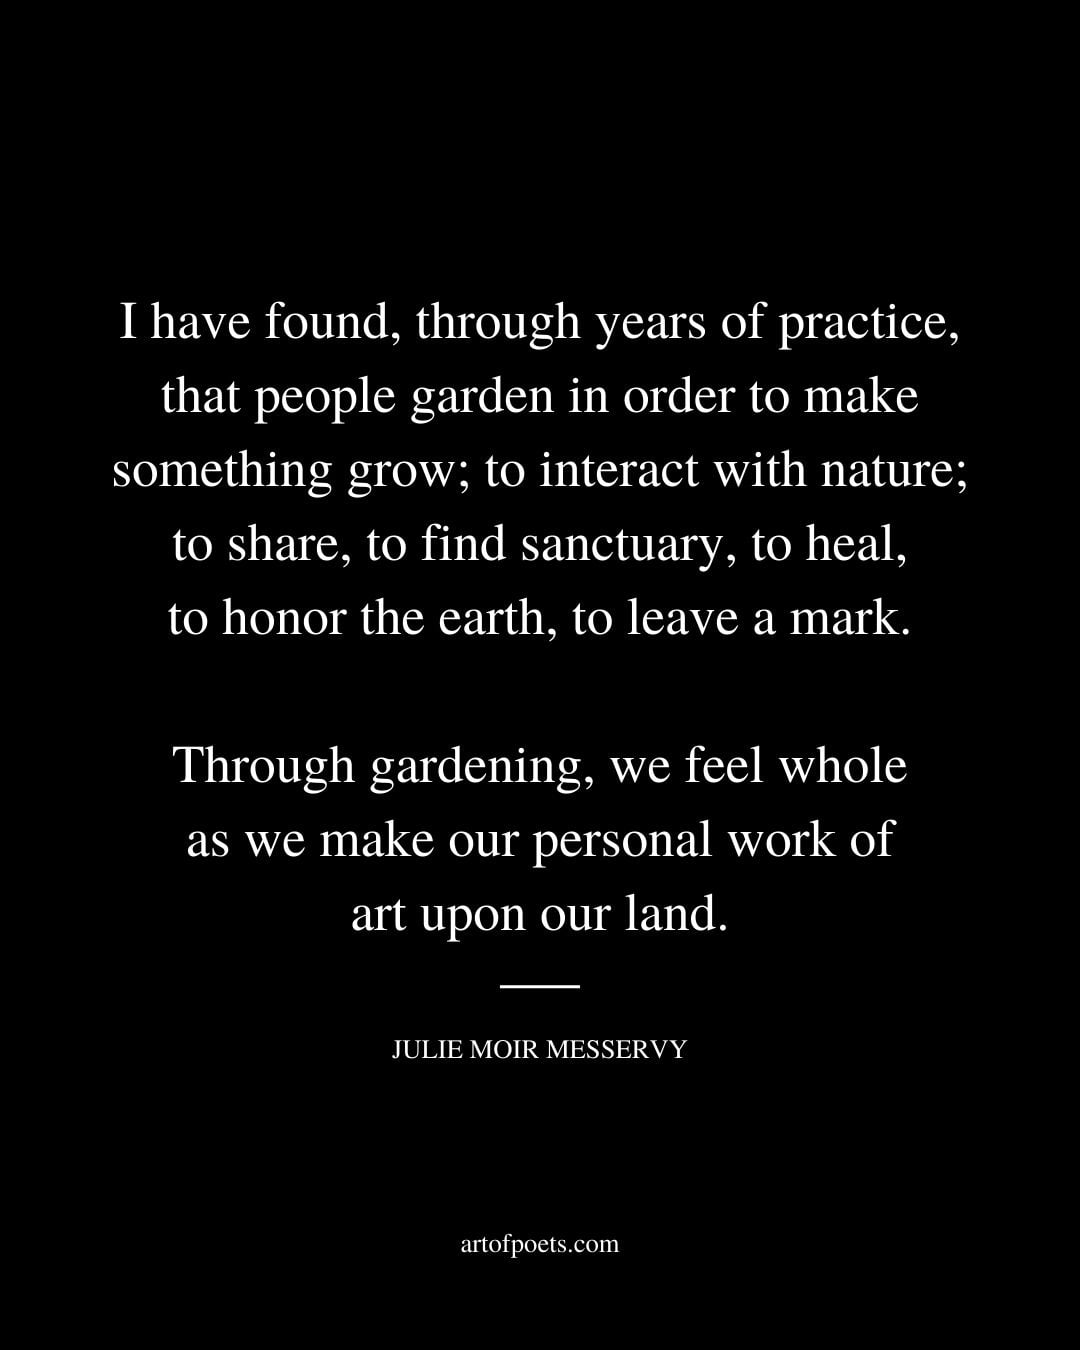 I have found through years of practice that people garden in order to make something grow